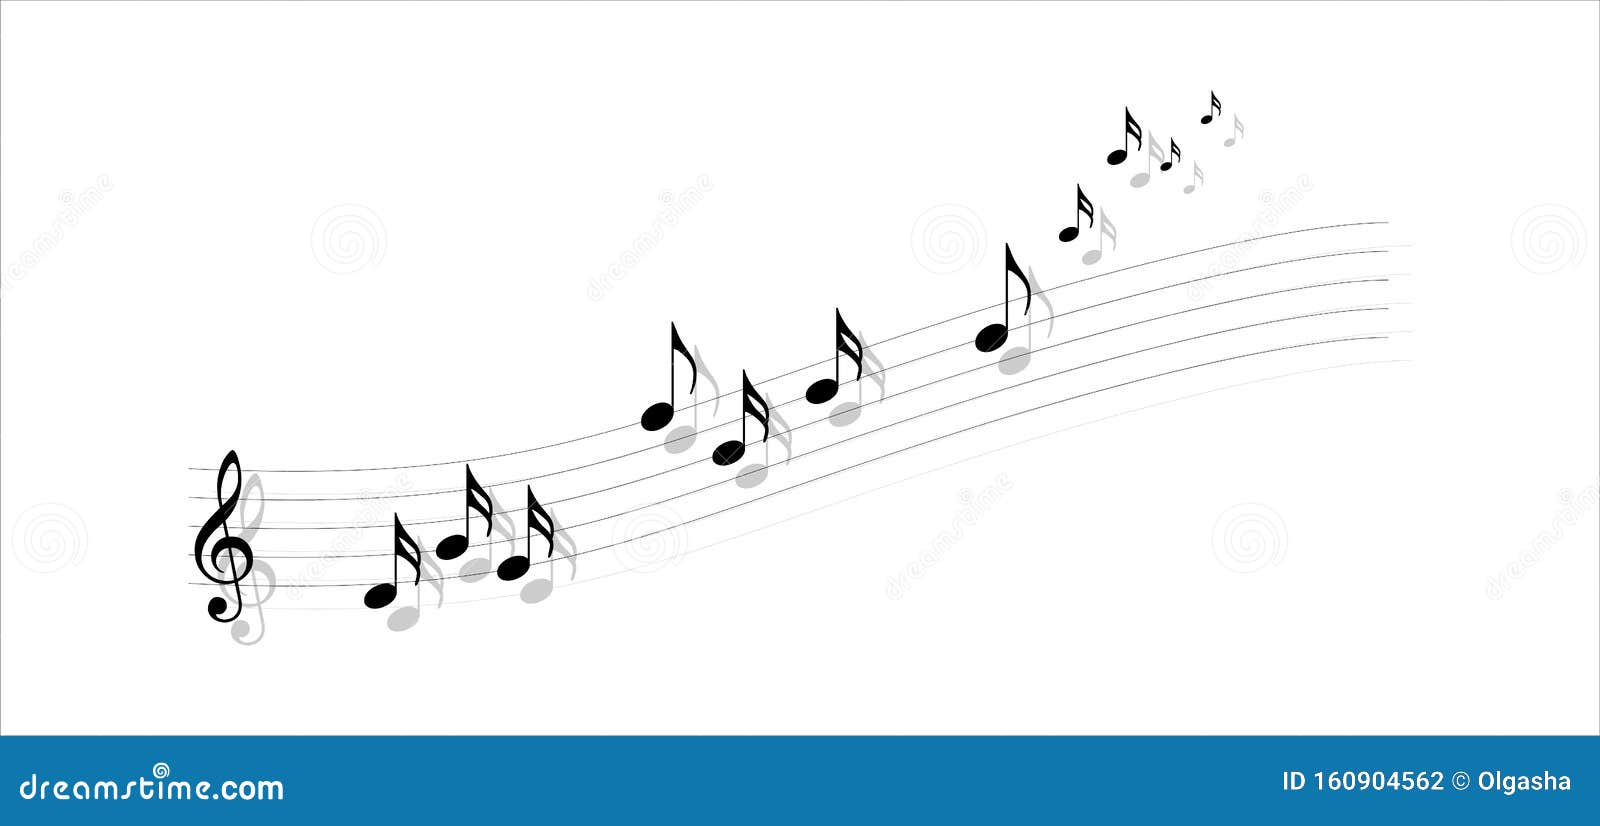 music-notes-musical-phrase-stock-vector-illustration-of-graphic-160904562